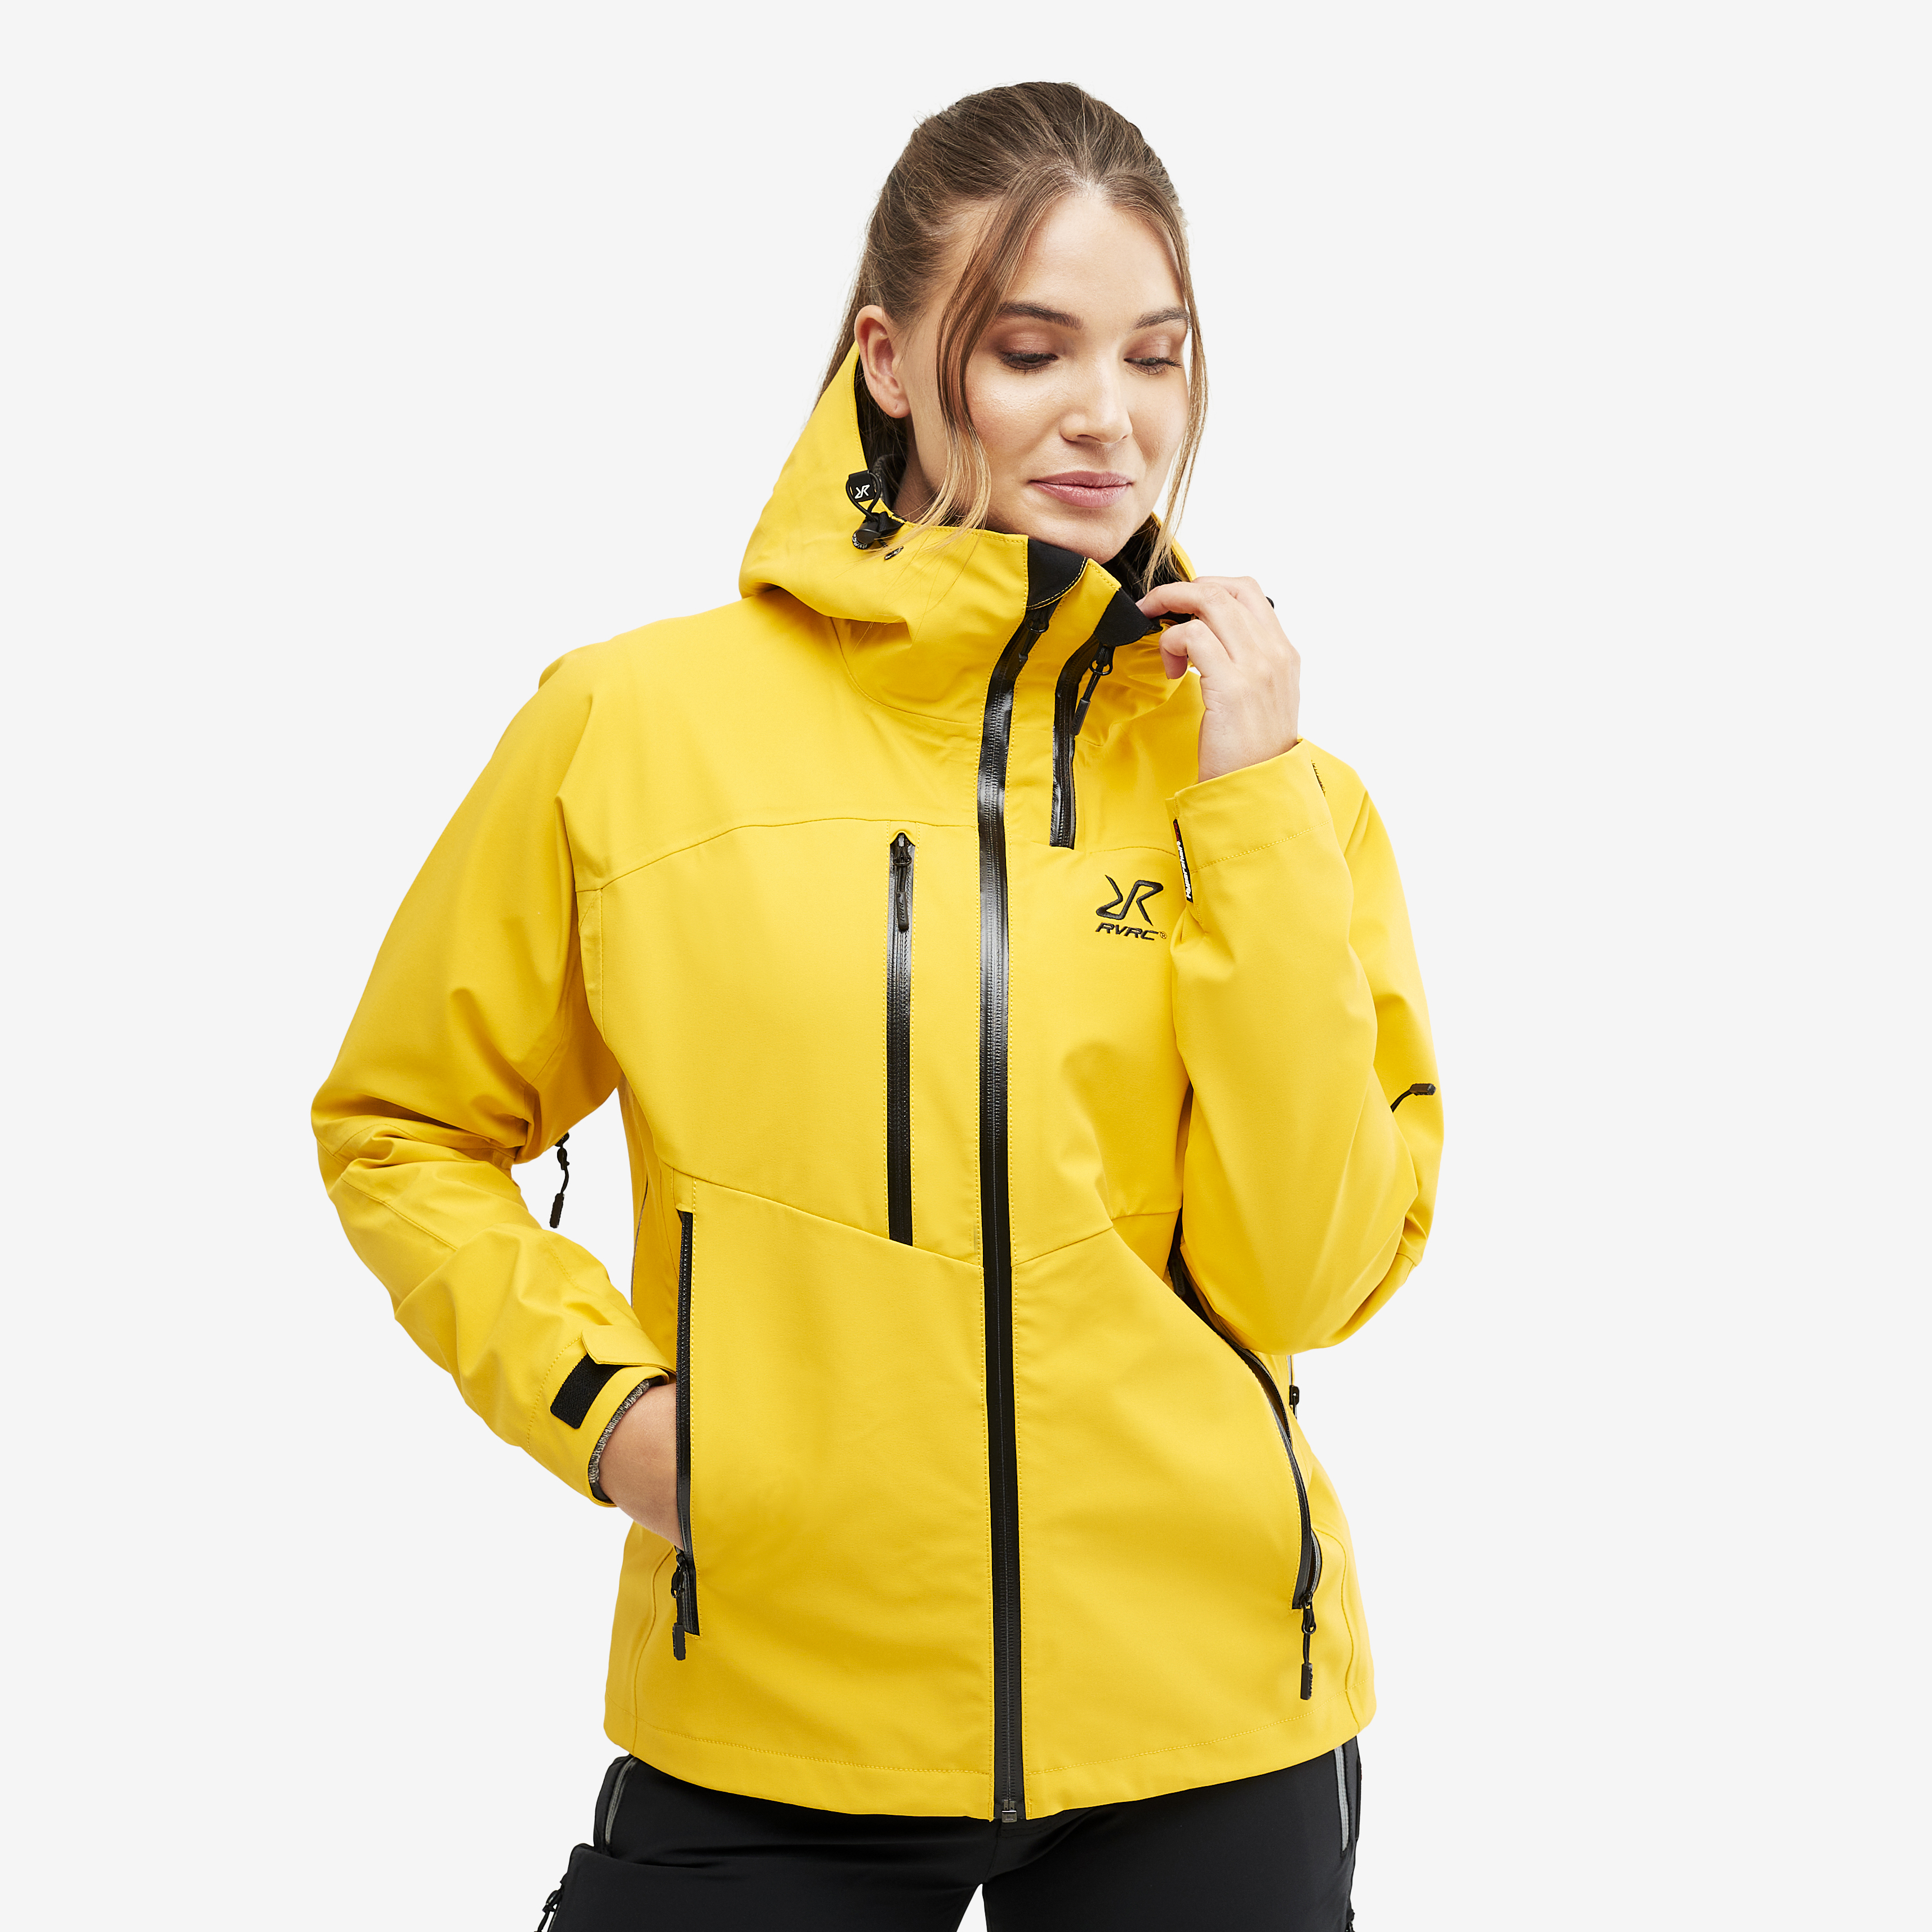 Cyclone Rescue Jacket 2.0 Yellow Dame